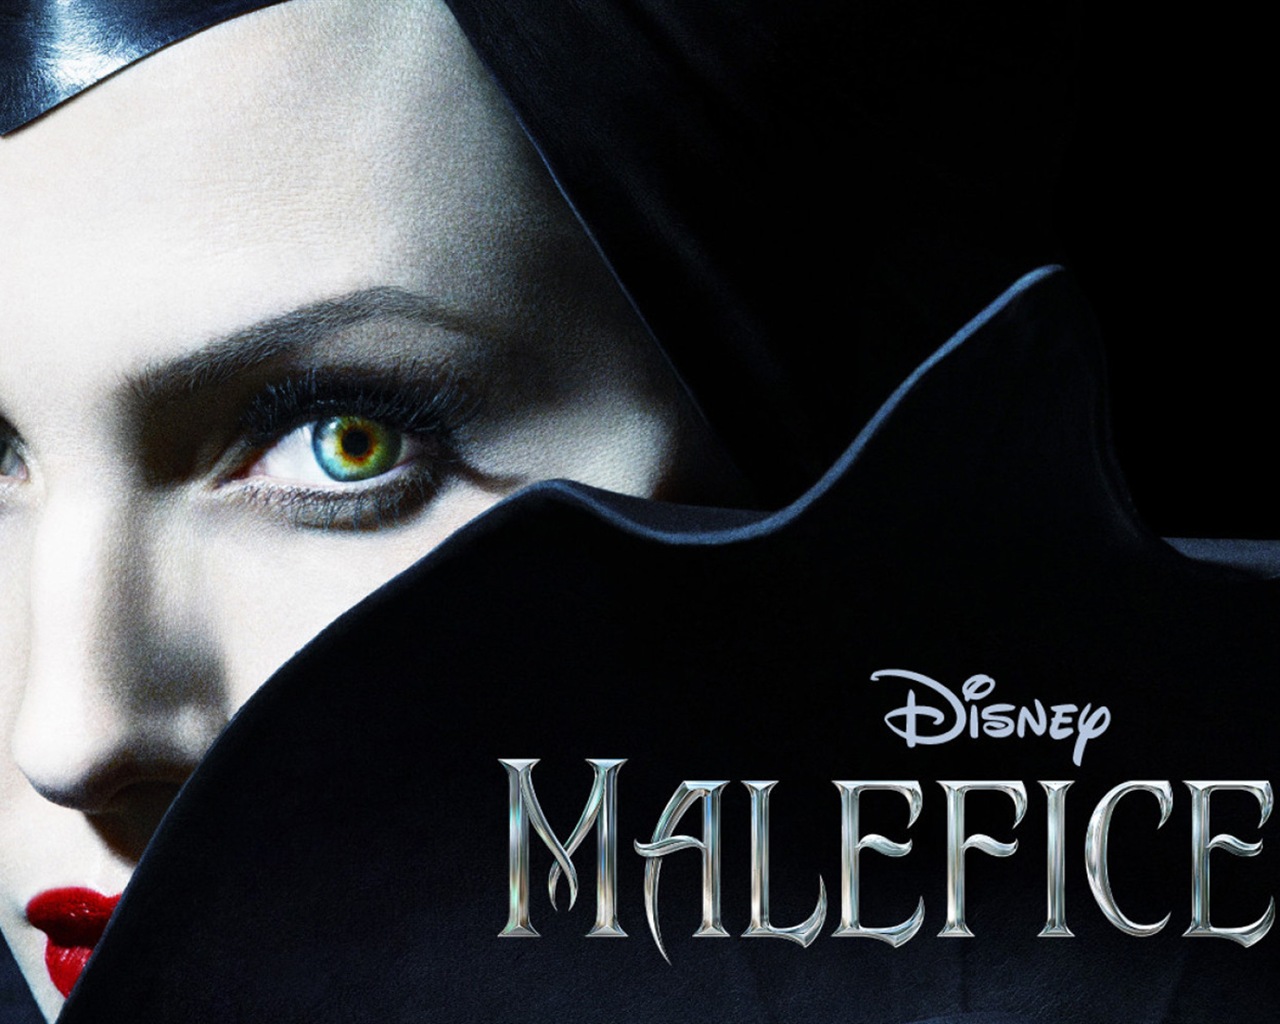 Maleficent 2014 HD movie wallpapers #14 - 1280x1024